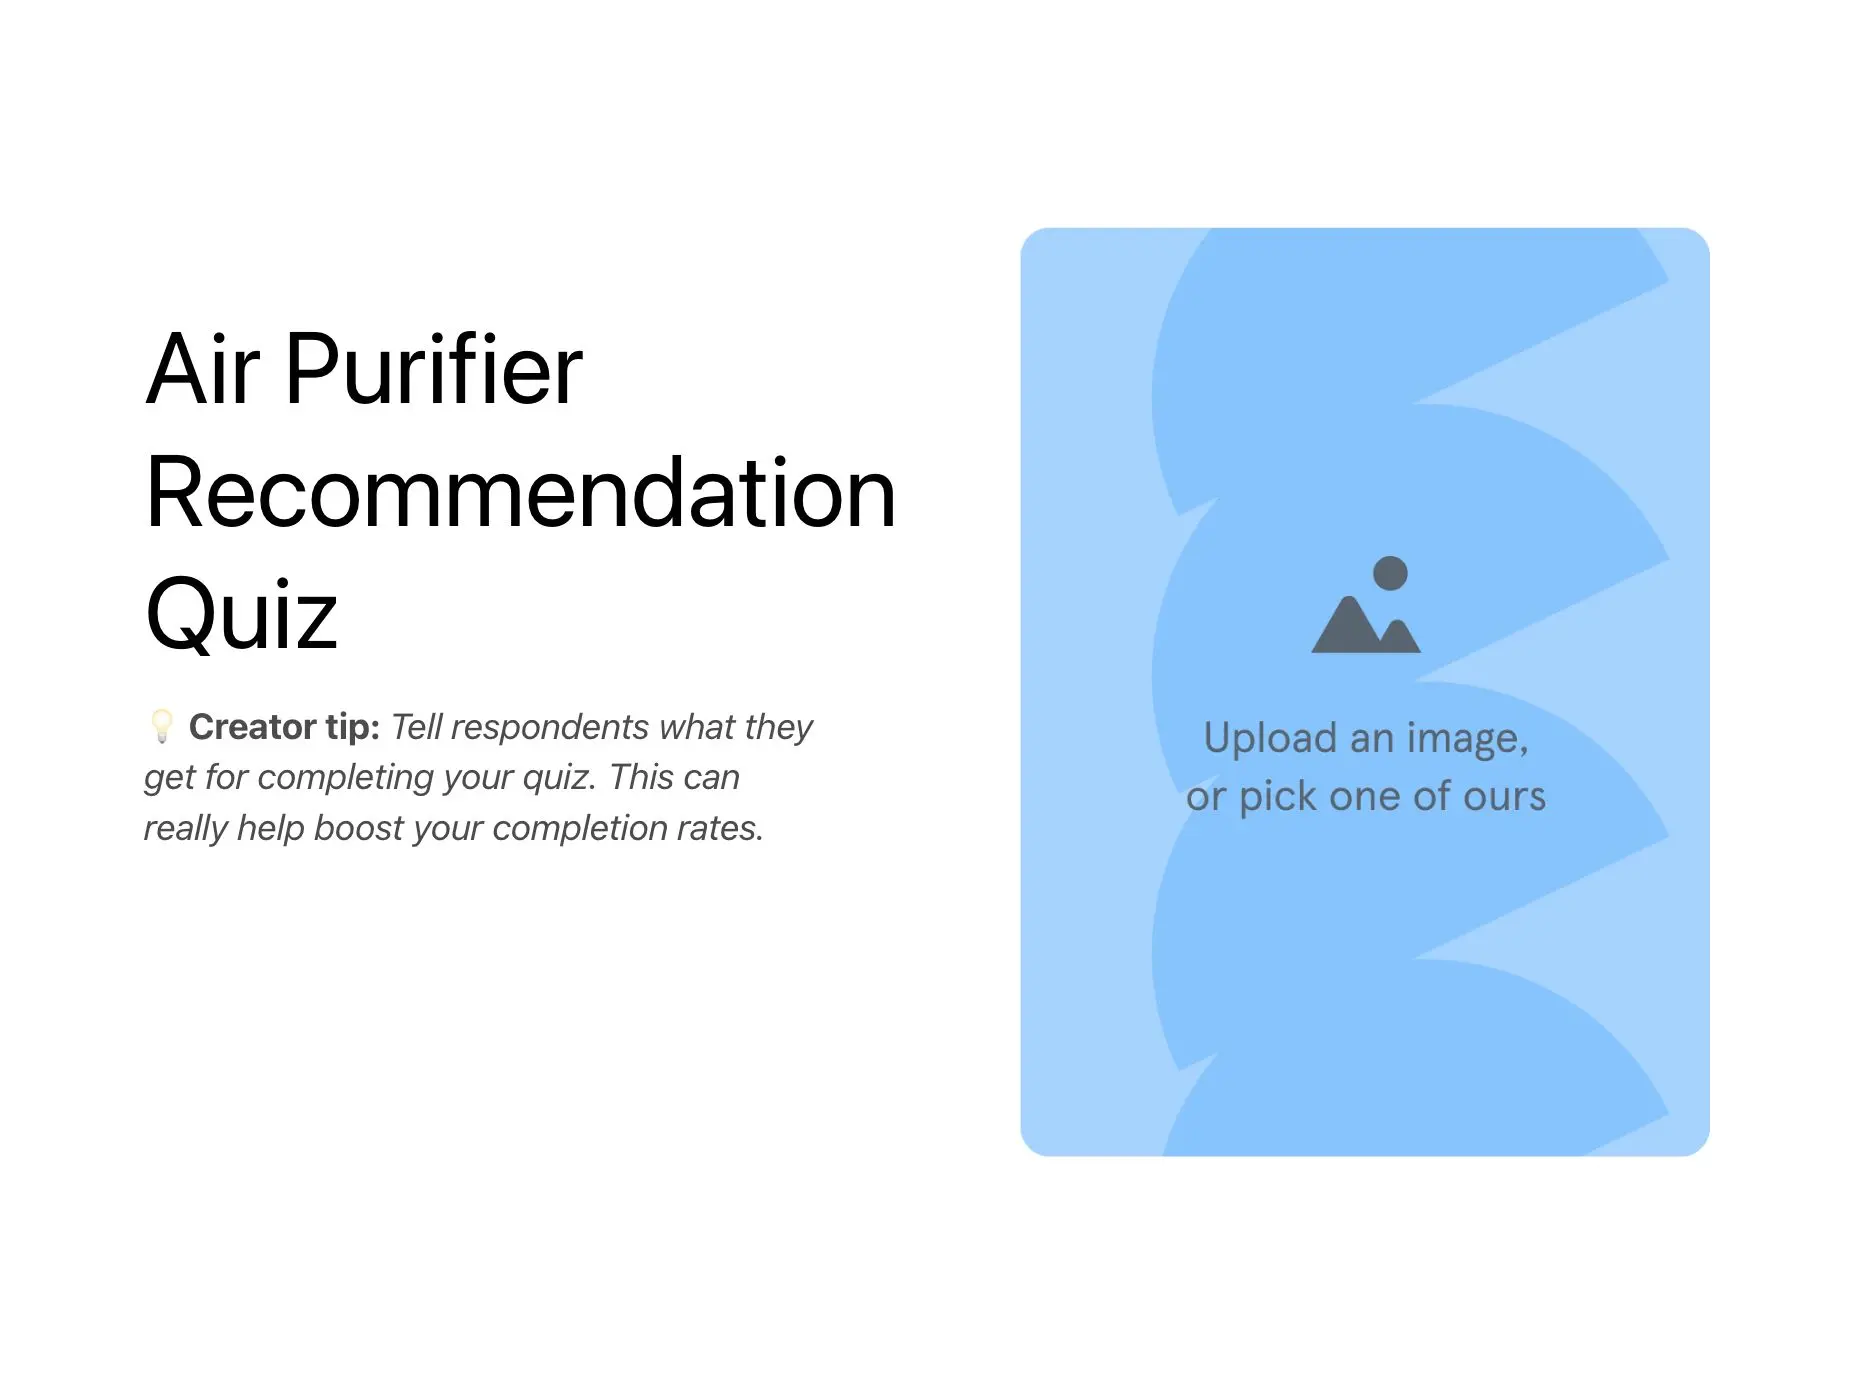 Air Purifier Recommendation Quiz Template Hero